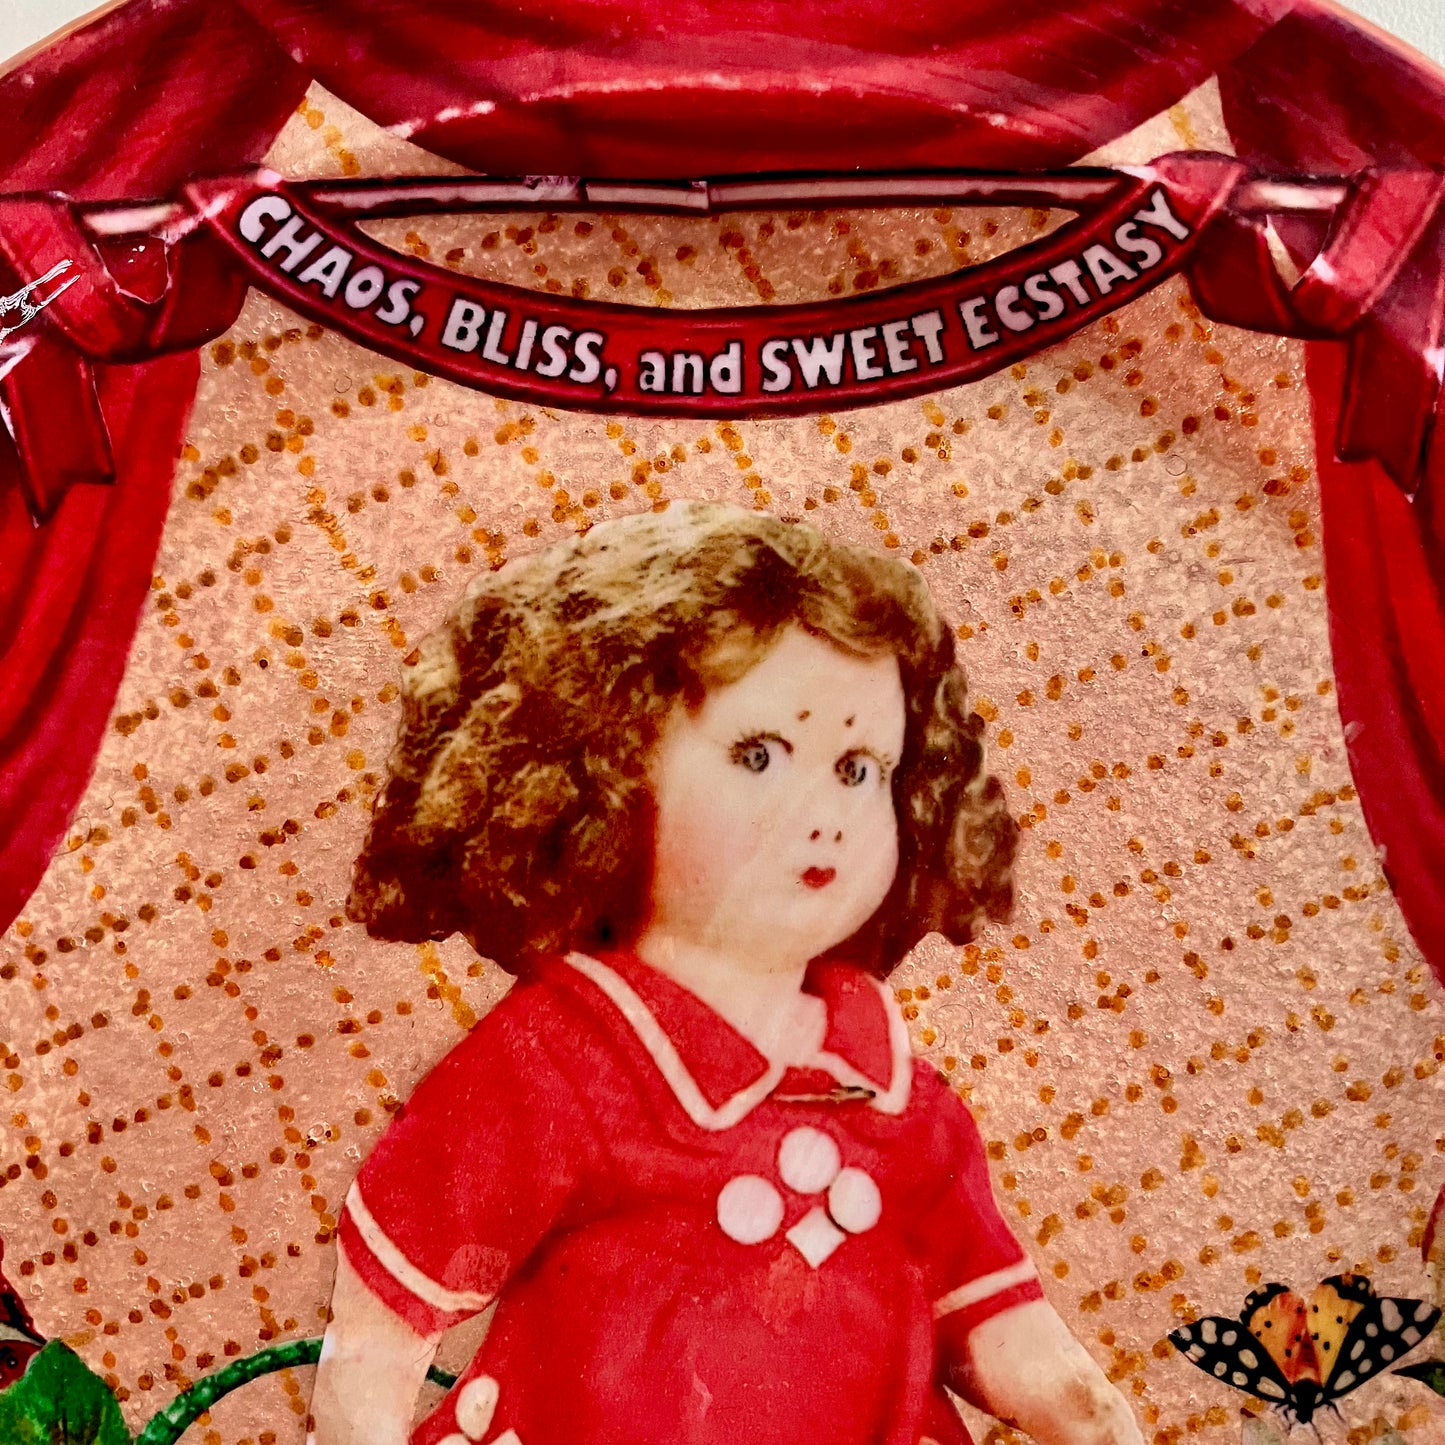 Chaos, Bliss, and Sweet Ecstasy Wall Plate by House of Frisson, closeup detail showing a kitsch vintage doll, a moth, on a blush coloured background.